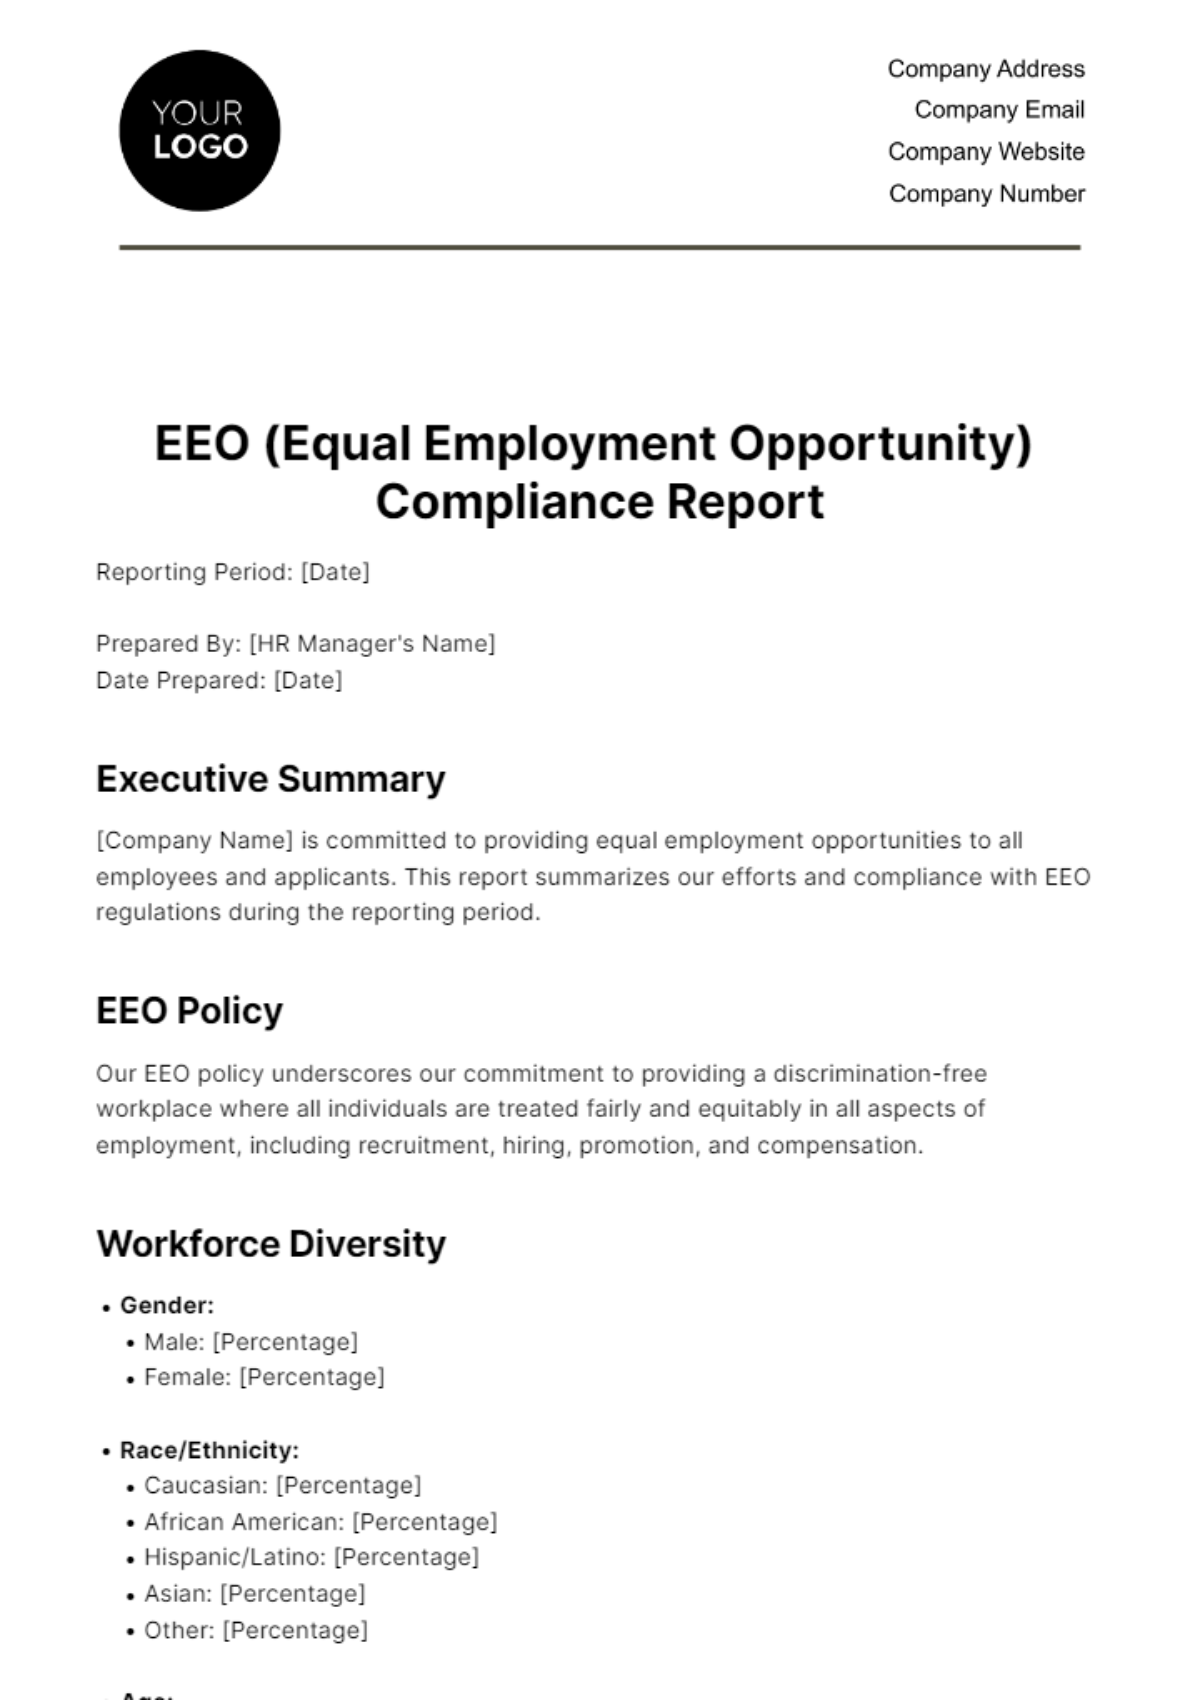 Free EEO (Equal Employment Opportunity) Compliance Report HR Template